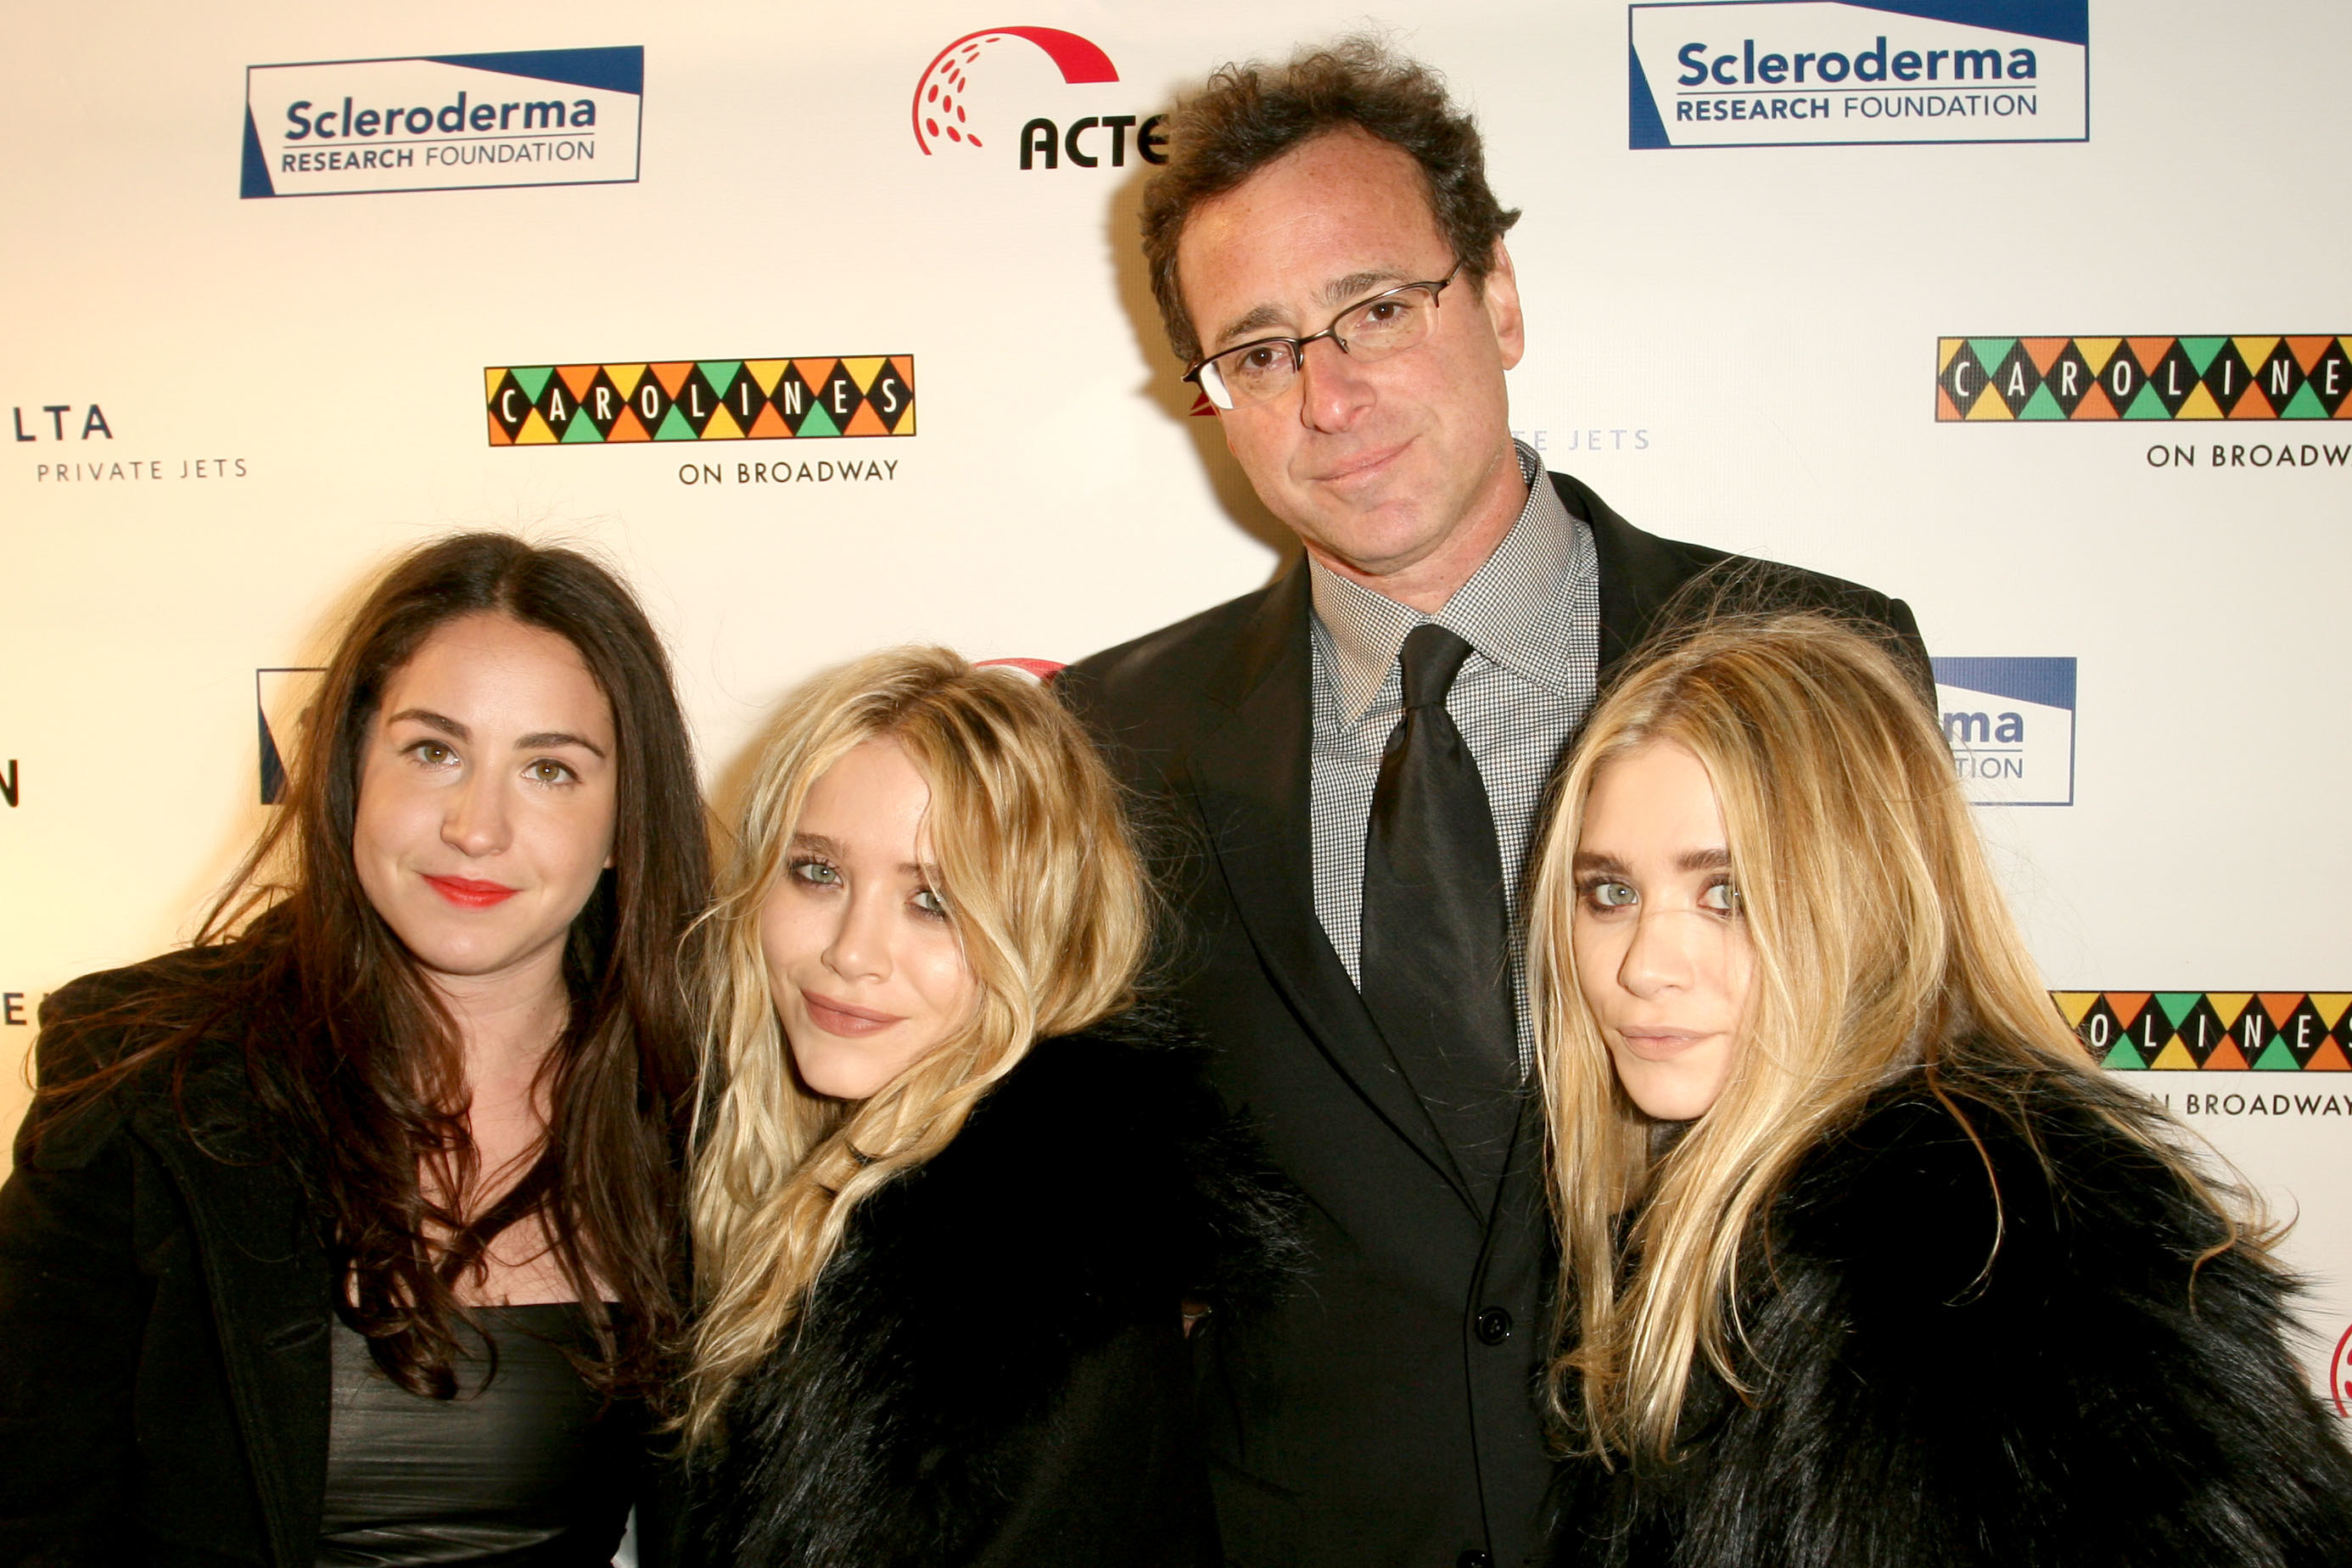 Aubrey Saget, Mary-Kate Olsen, Bob Saget, and Ashley Olsen attend the Cool Comedy Gala in 2010